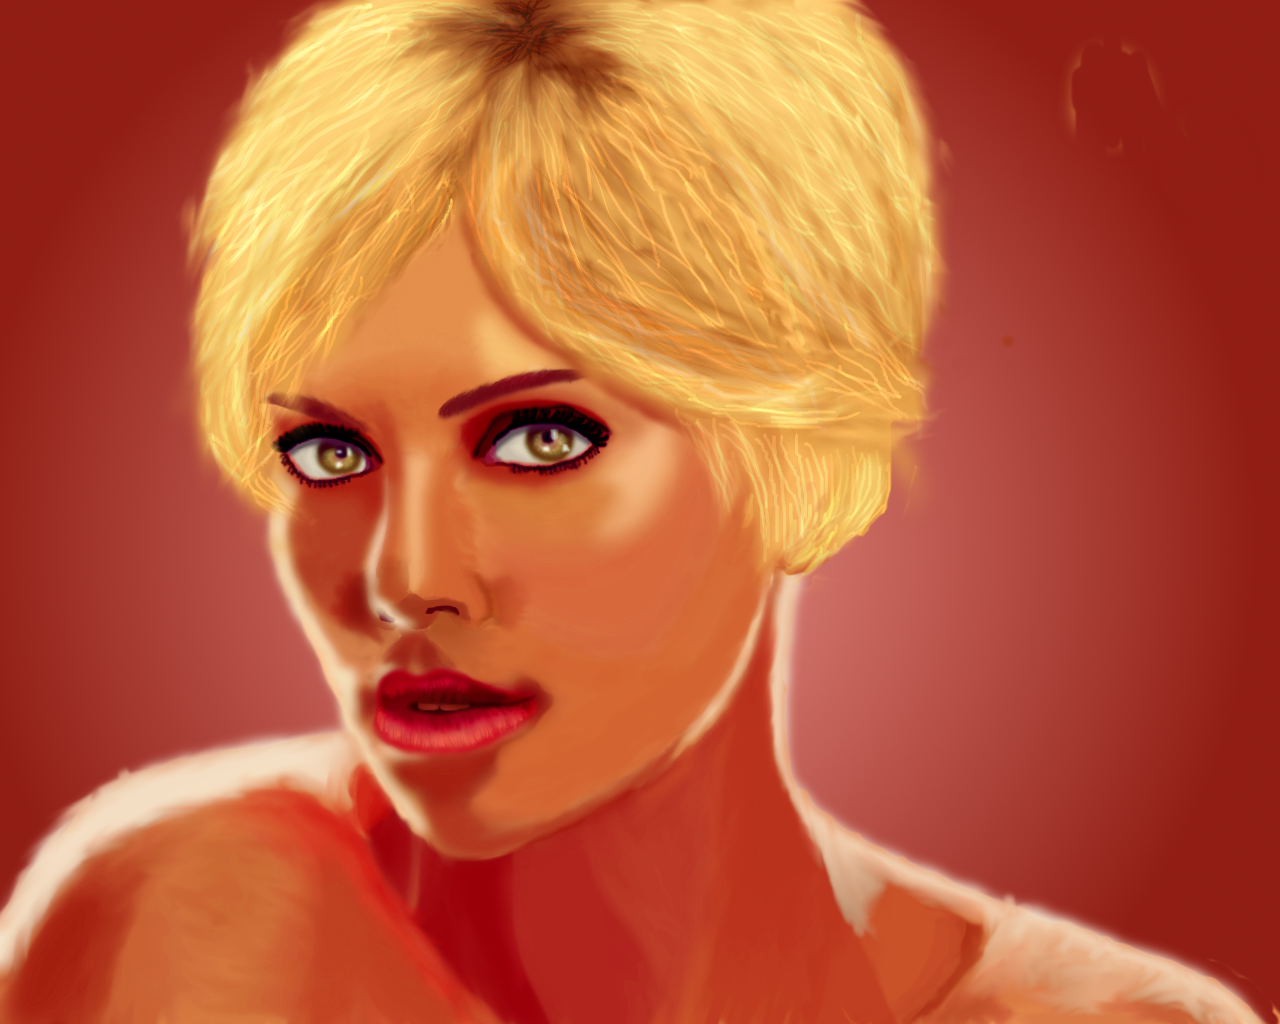 charlize theron by andybaker